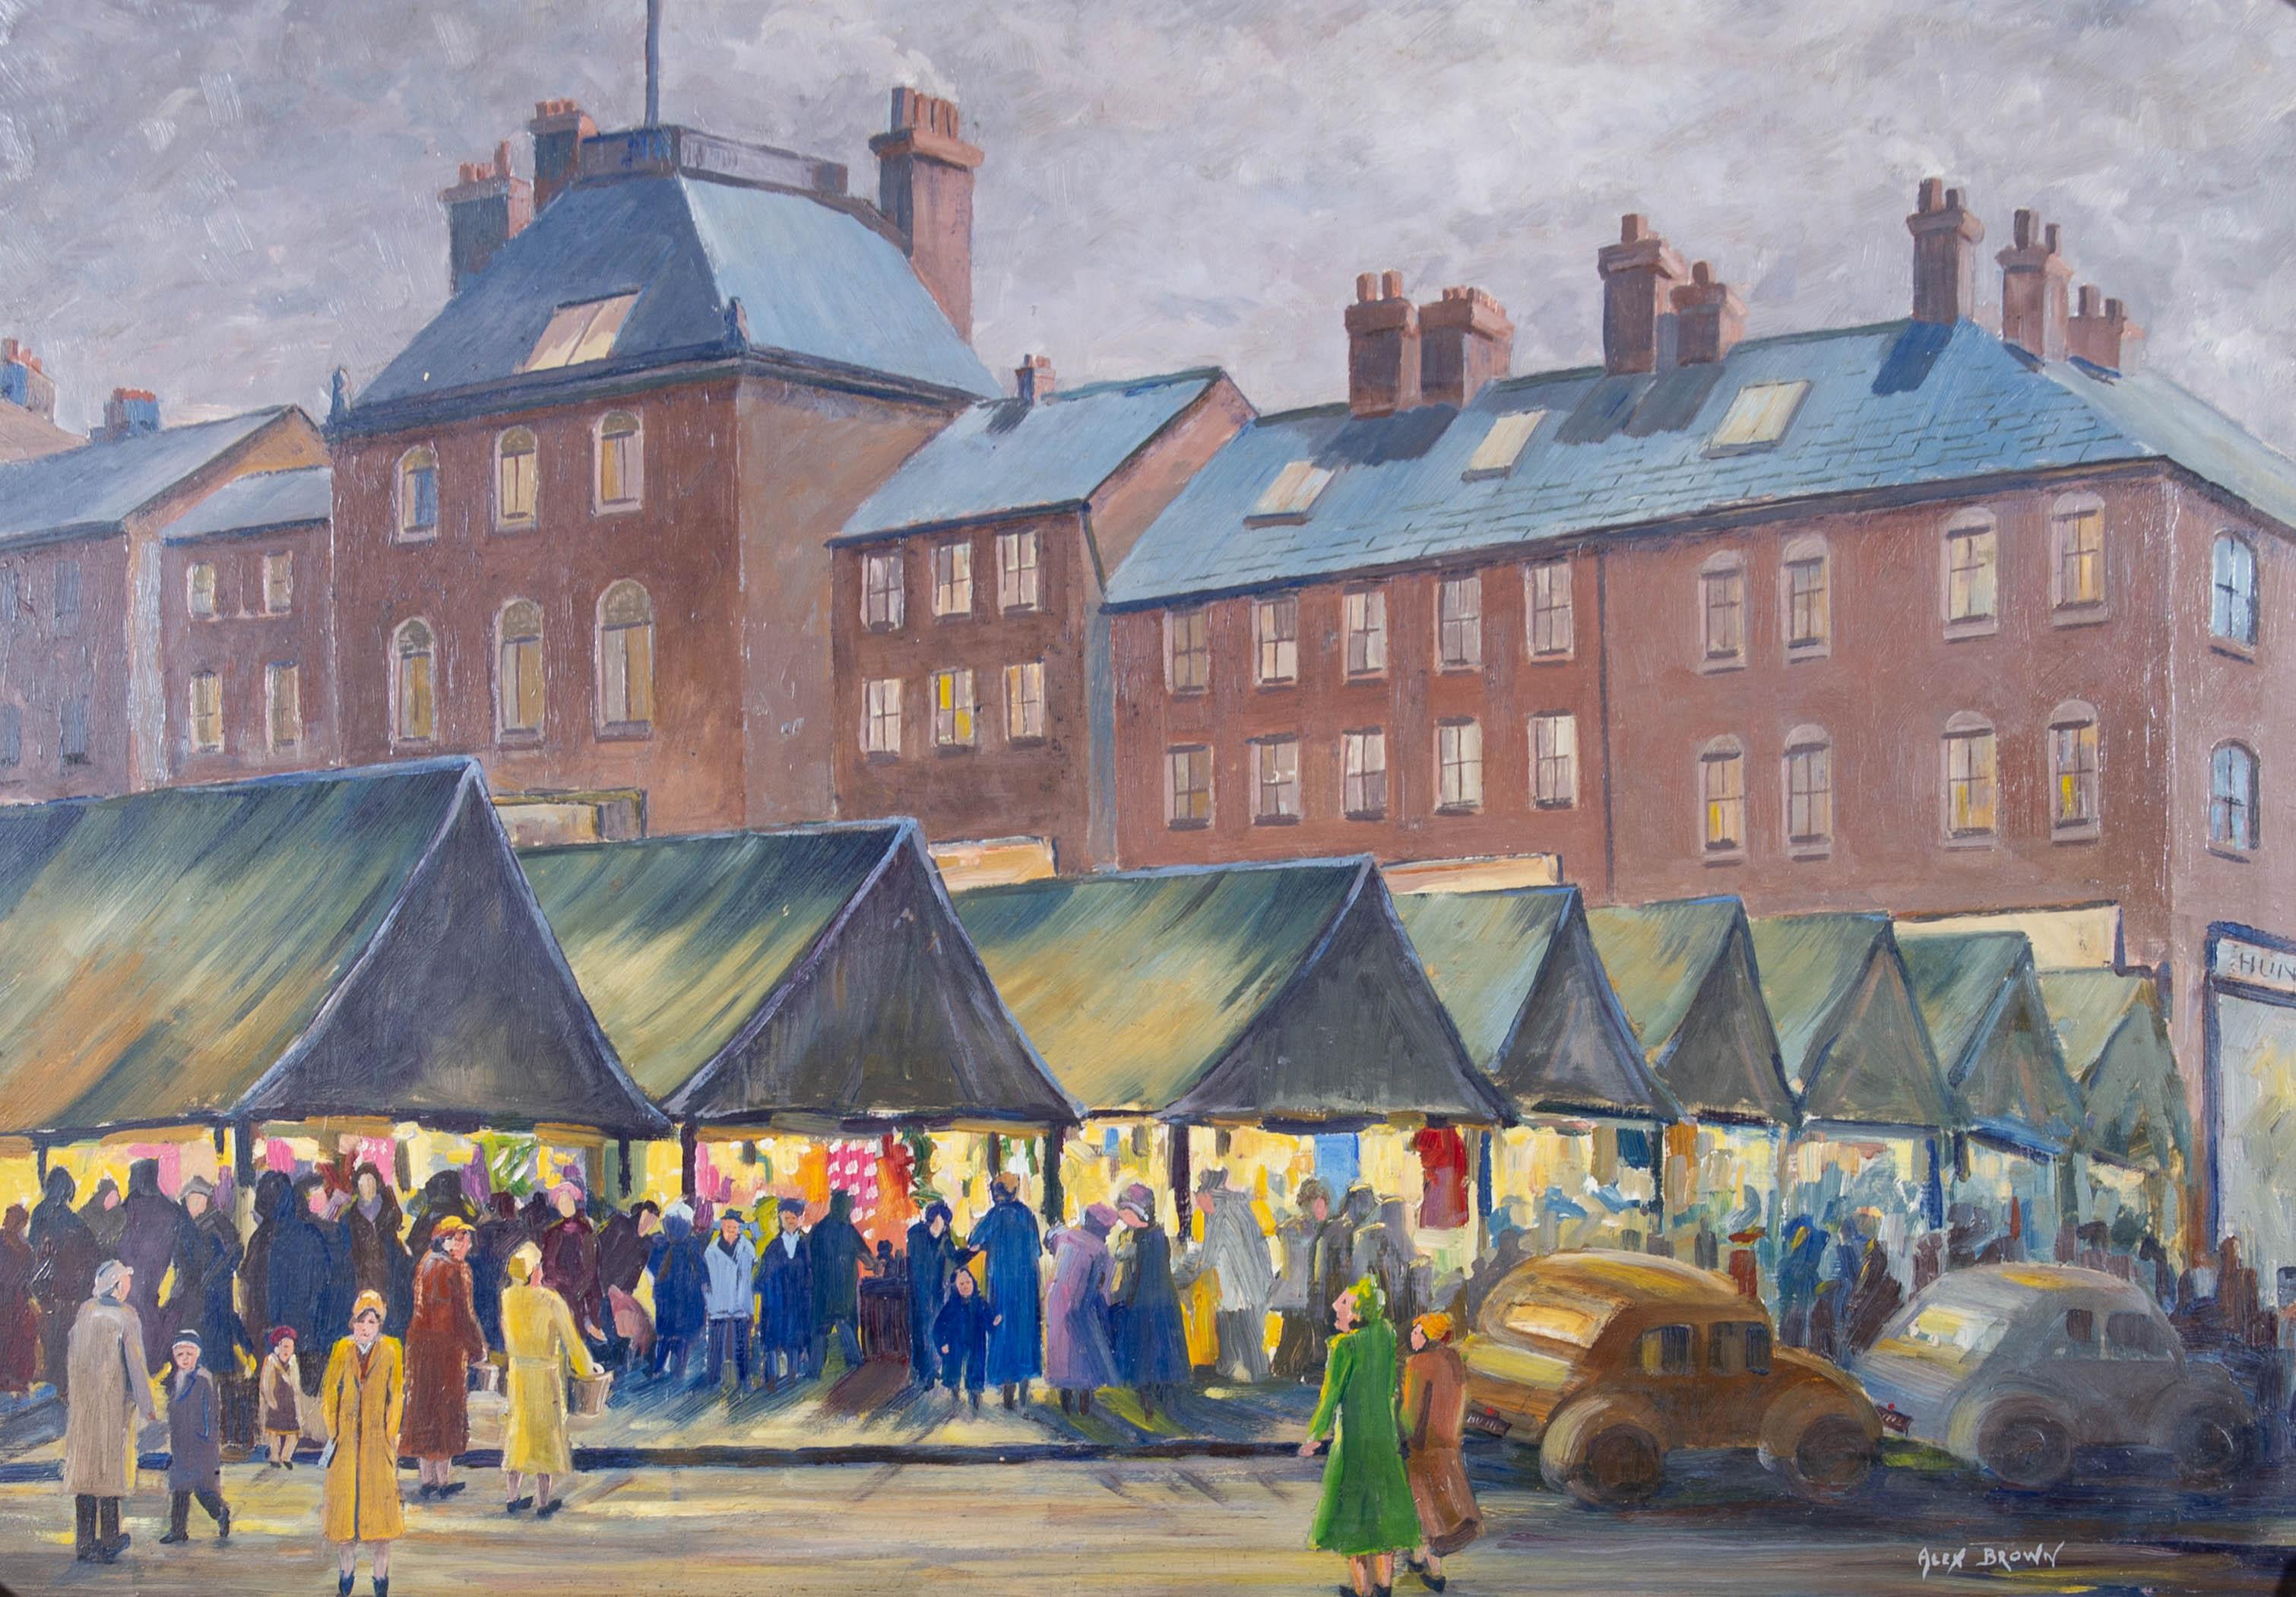 A bustling market scene in oil showing a brightly lit market taking place beneath a complex of canopies under a grey sky. The artist has signed to the lower right and the painting has been attractively presented in a wood frame with carved acanthus